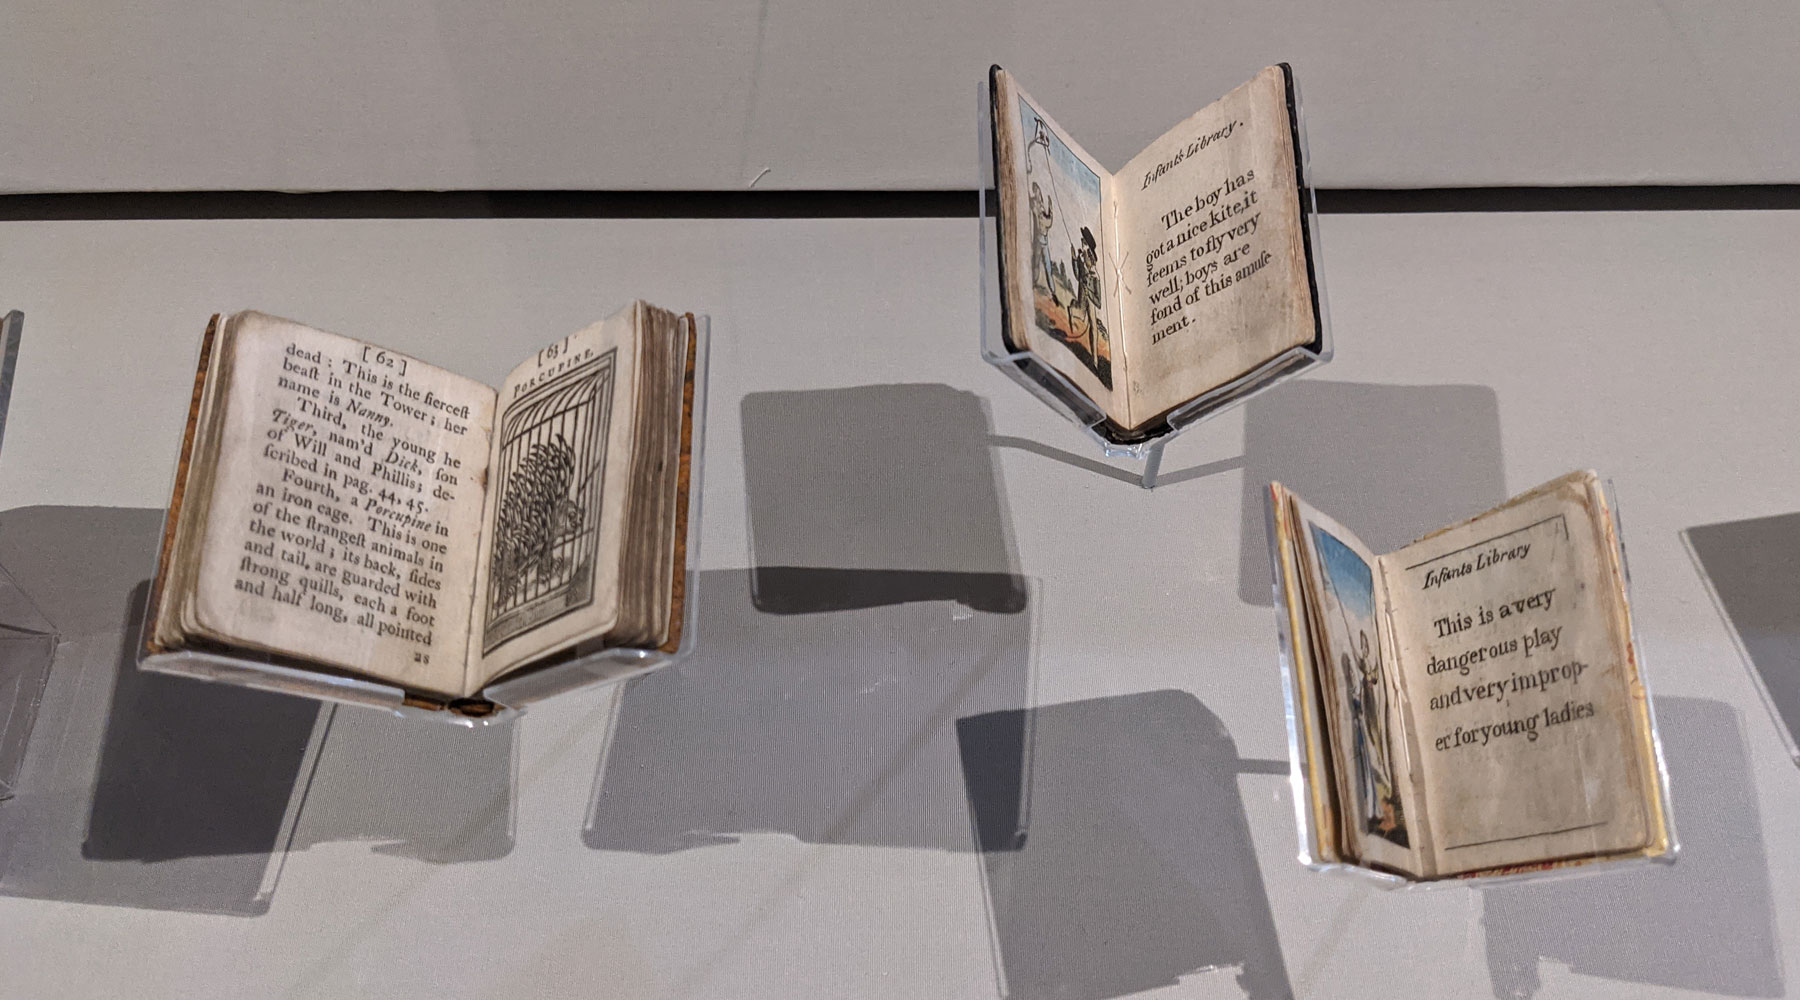 An exhibition of minature books at the British Library